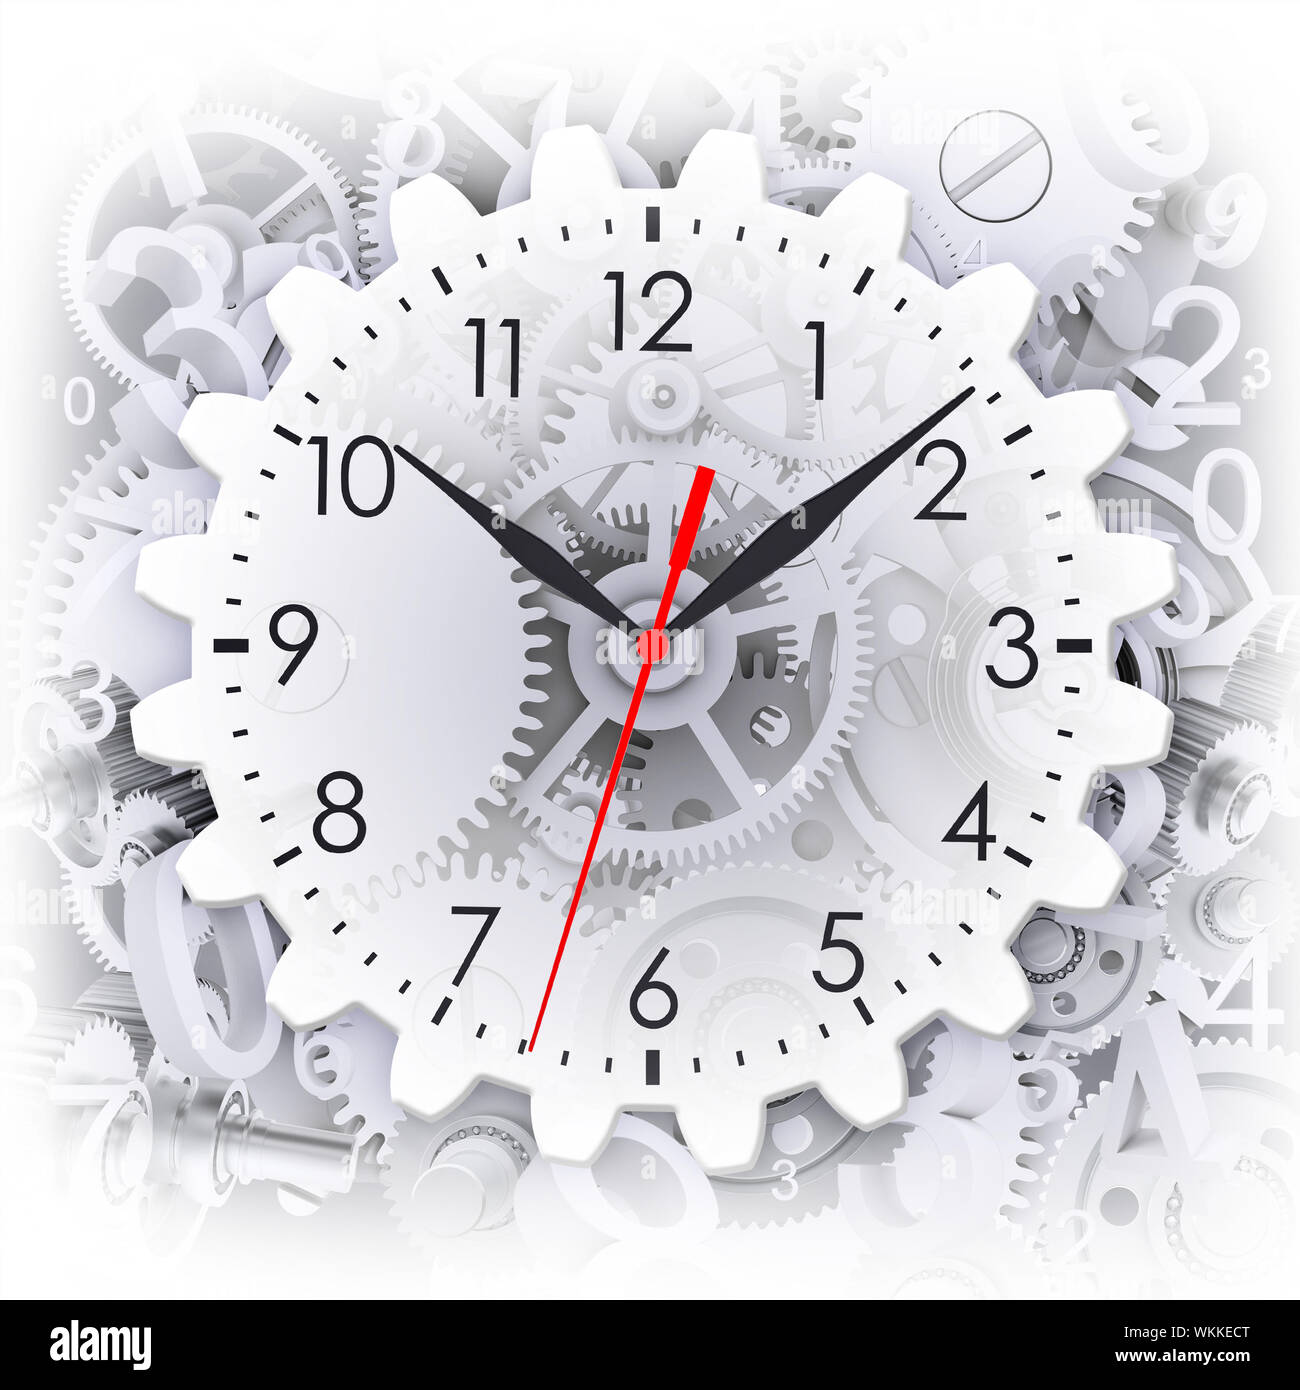 Clock face with figures and white gears. Green background Stock Photo